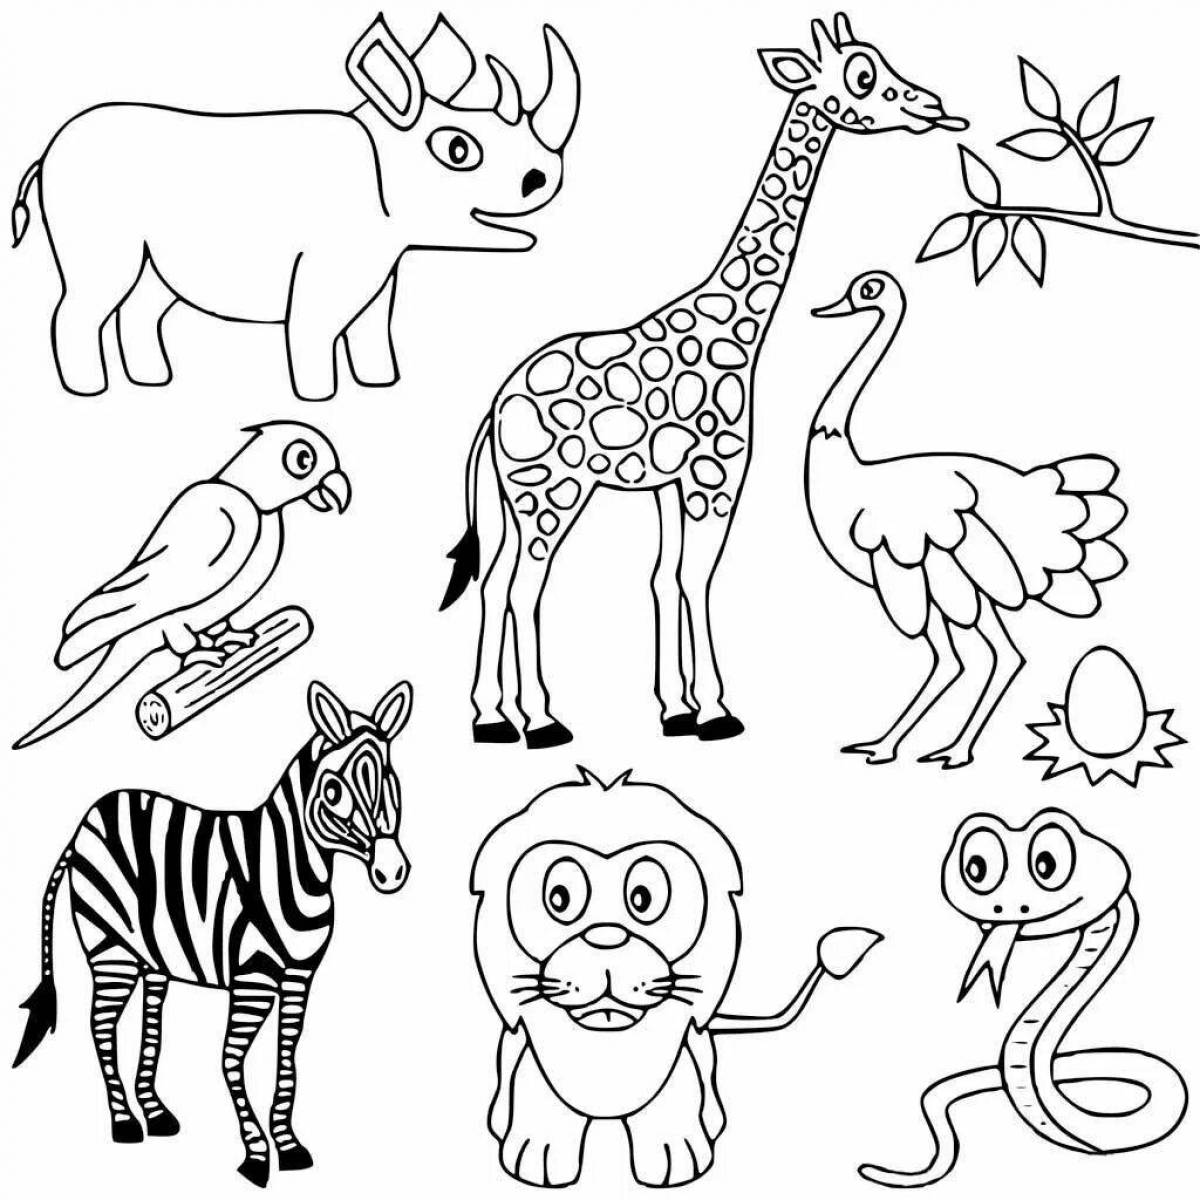 Impressive animal coloring pages grade 1